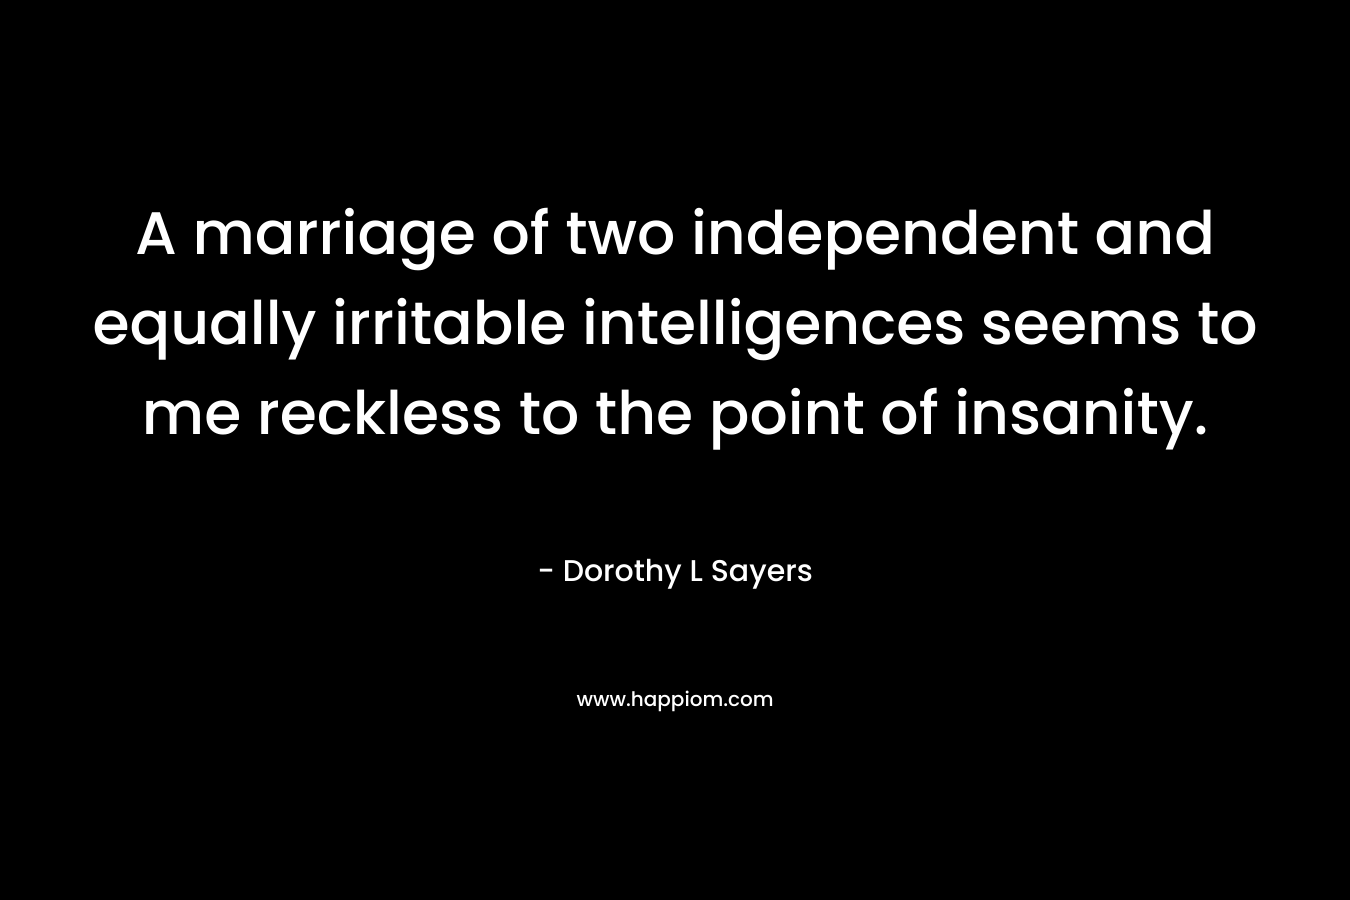 A marriage of two independent and equally irritable intelligences seems to me reckless to the point of insanity.